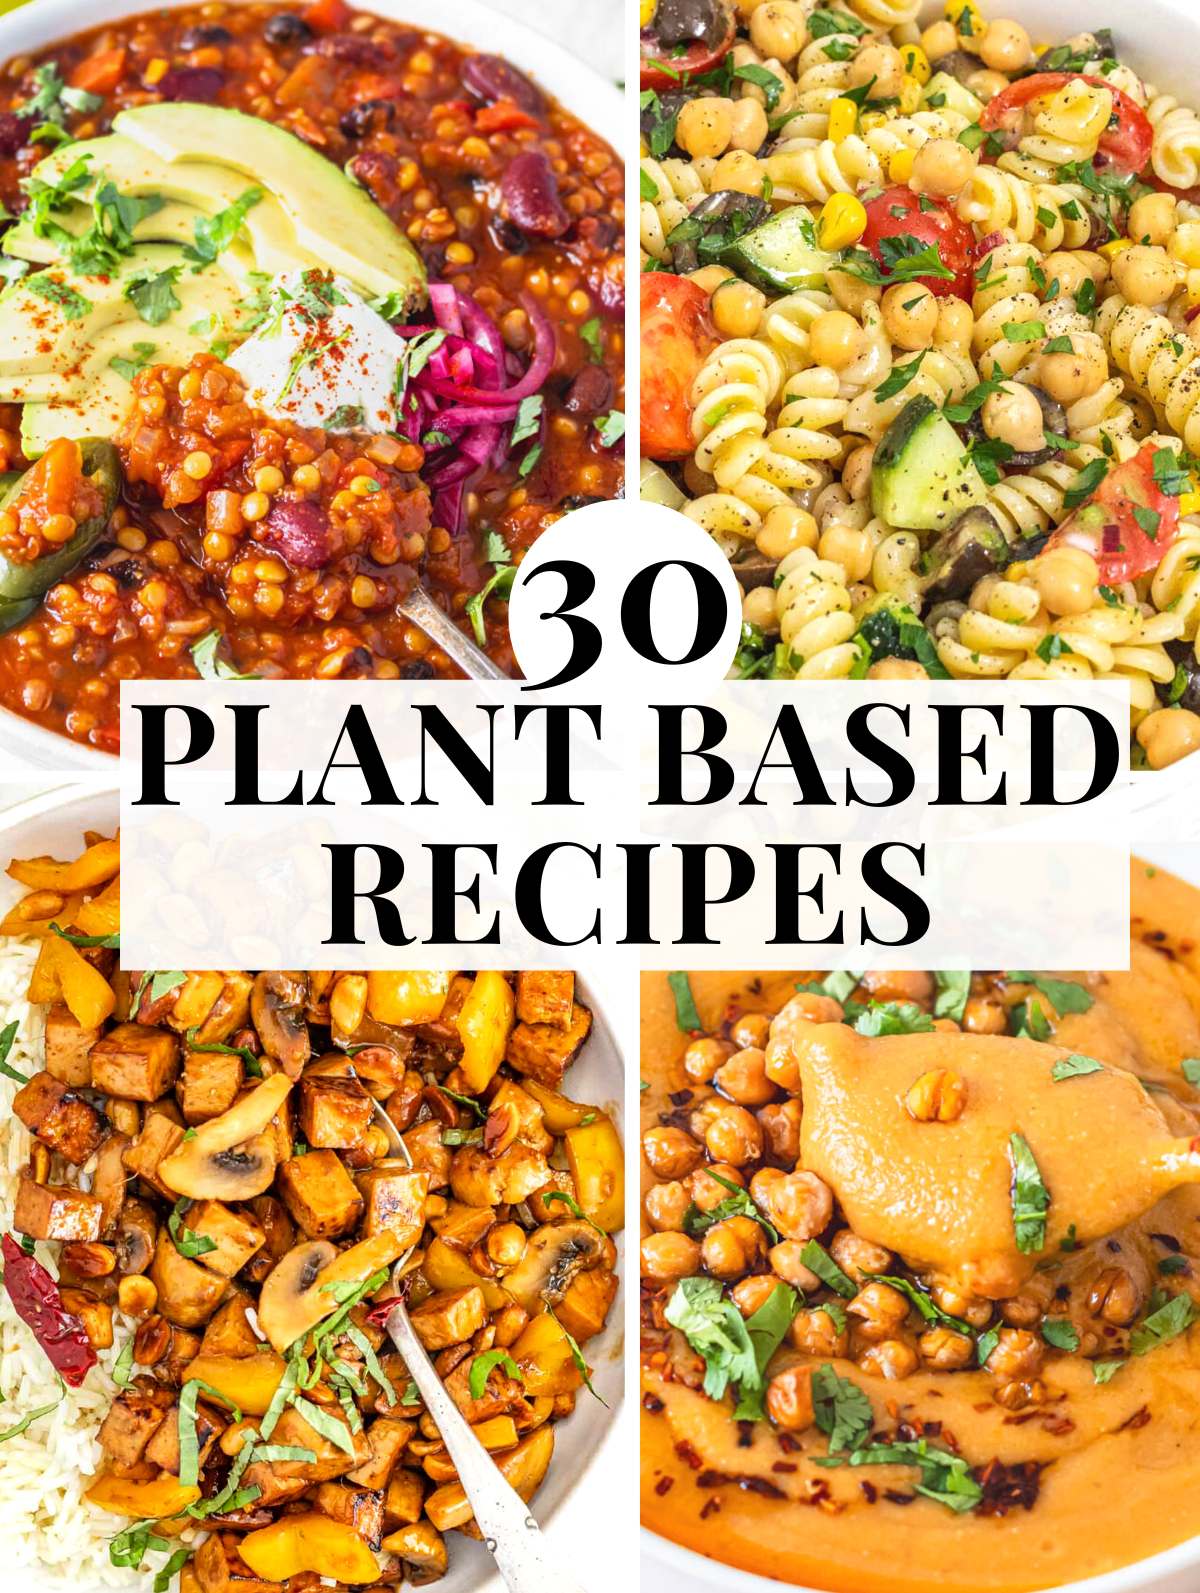 30 Vegan Lunch Ideas to Spice Up Your Meals (easy recipes)